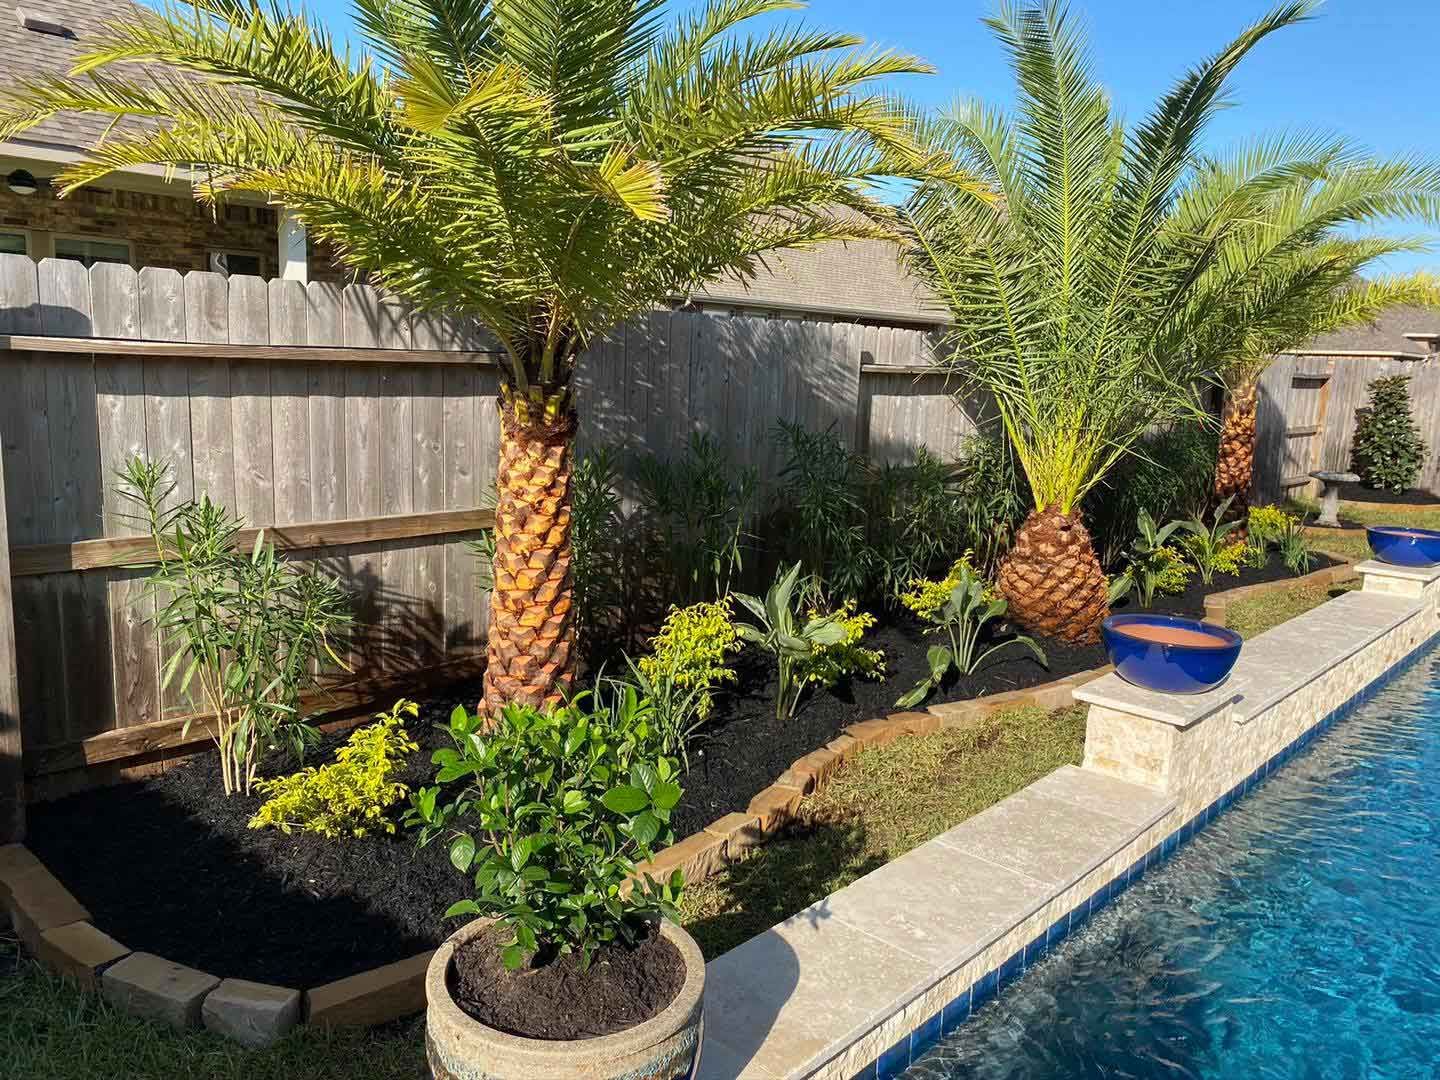 Palms in a pool landscape installed by Rosehill Palms